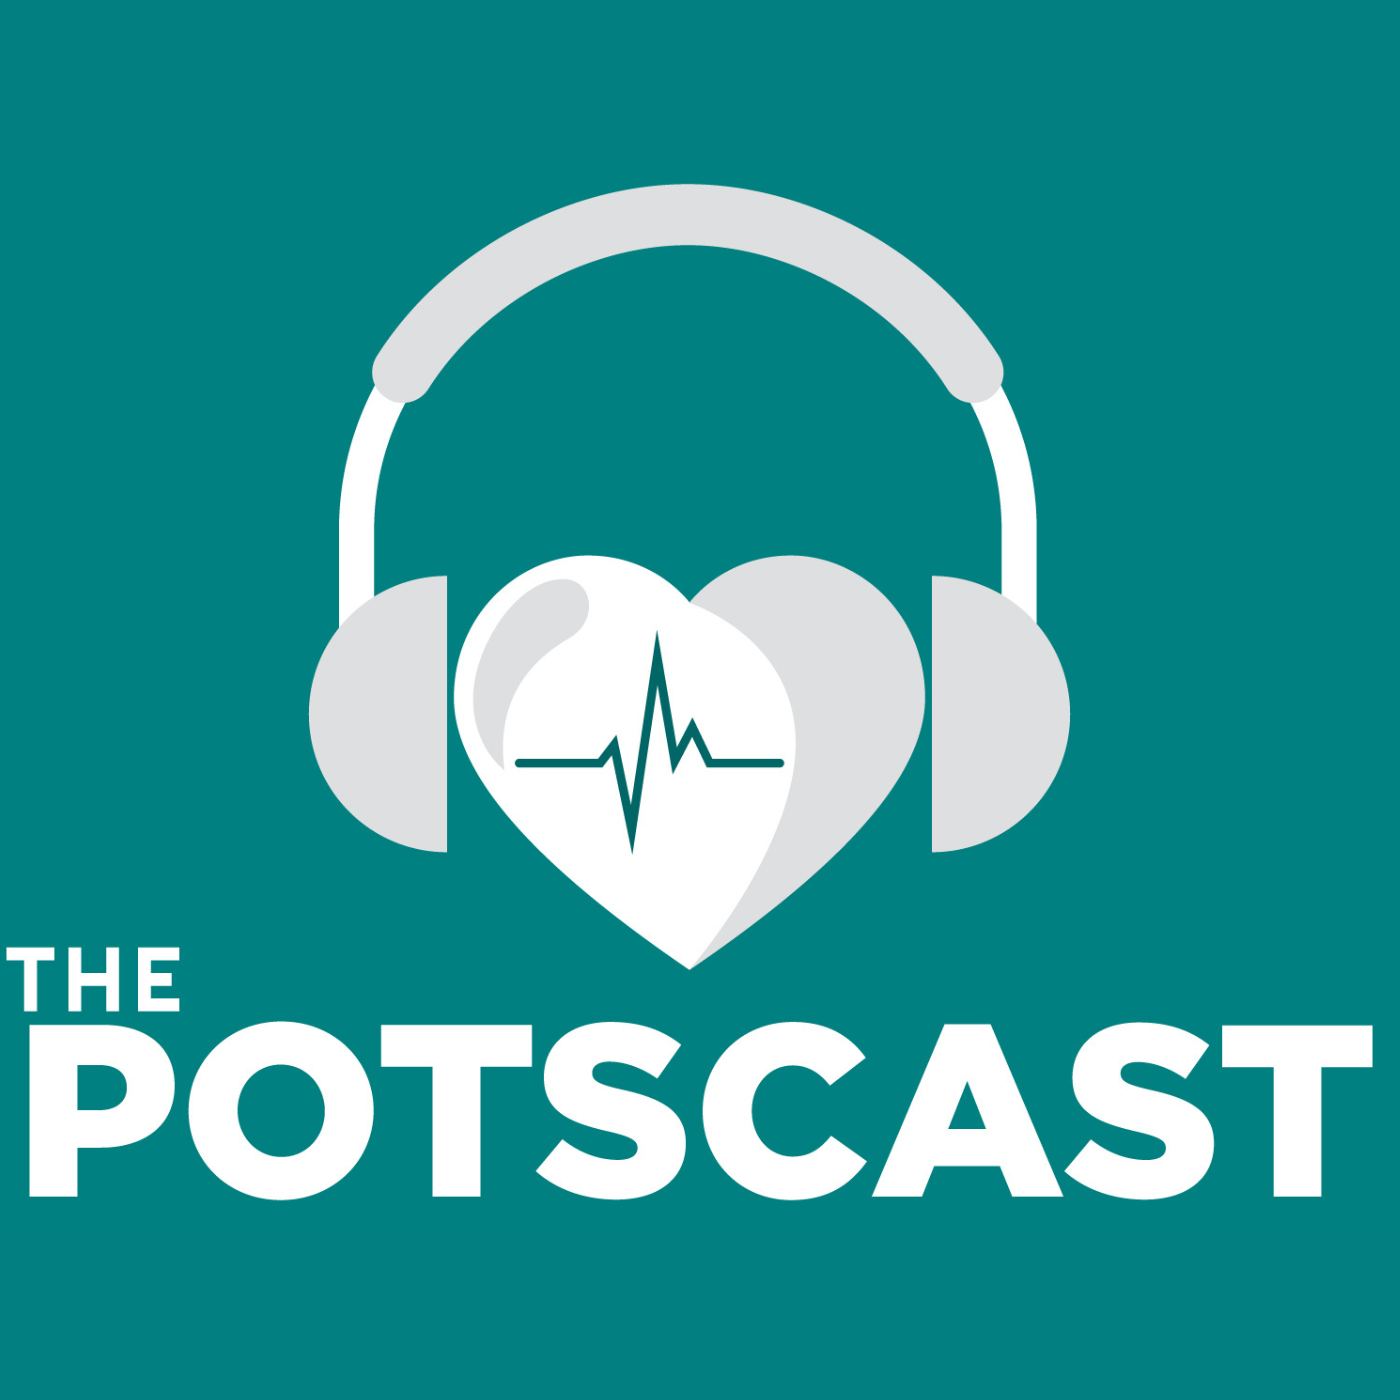 Research Study on The POTScast - please participate!